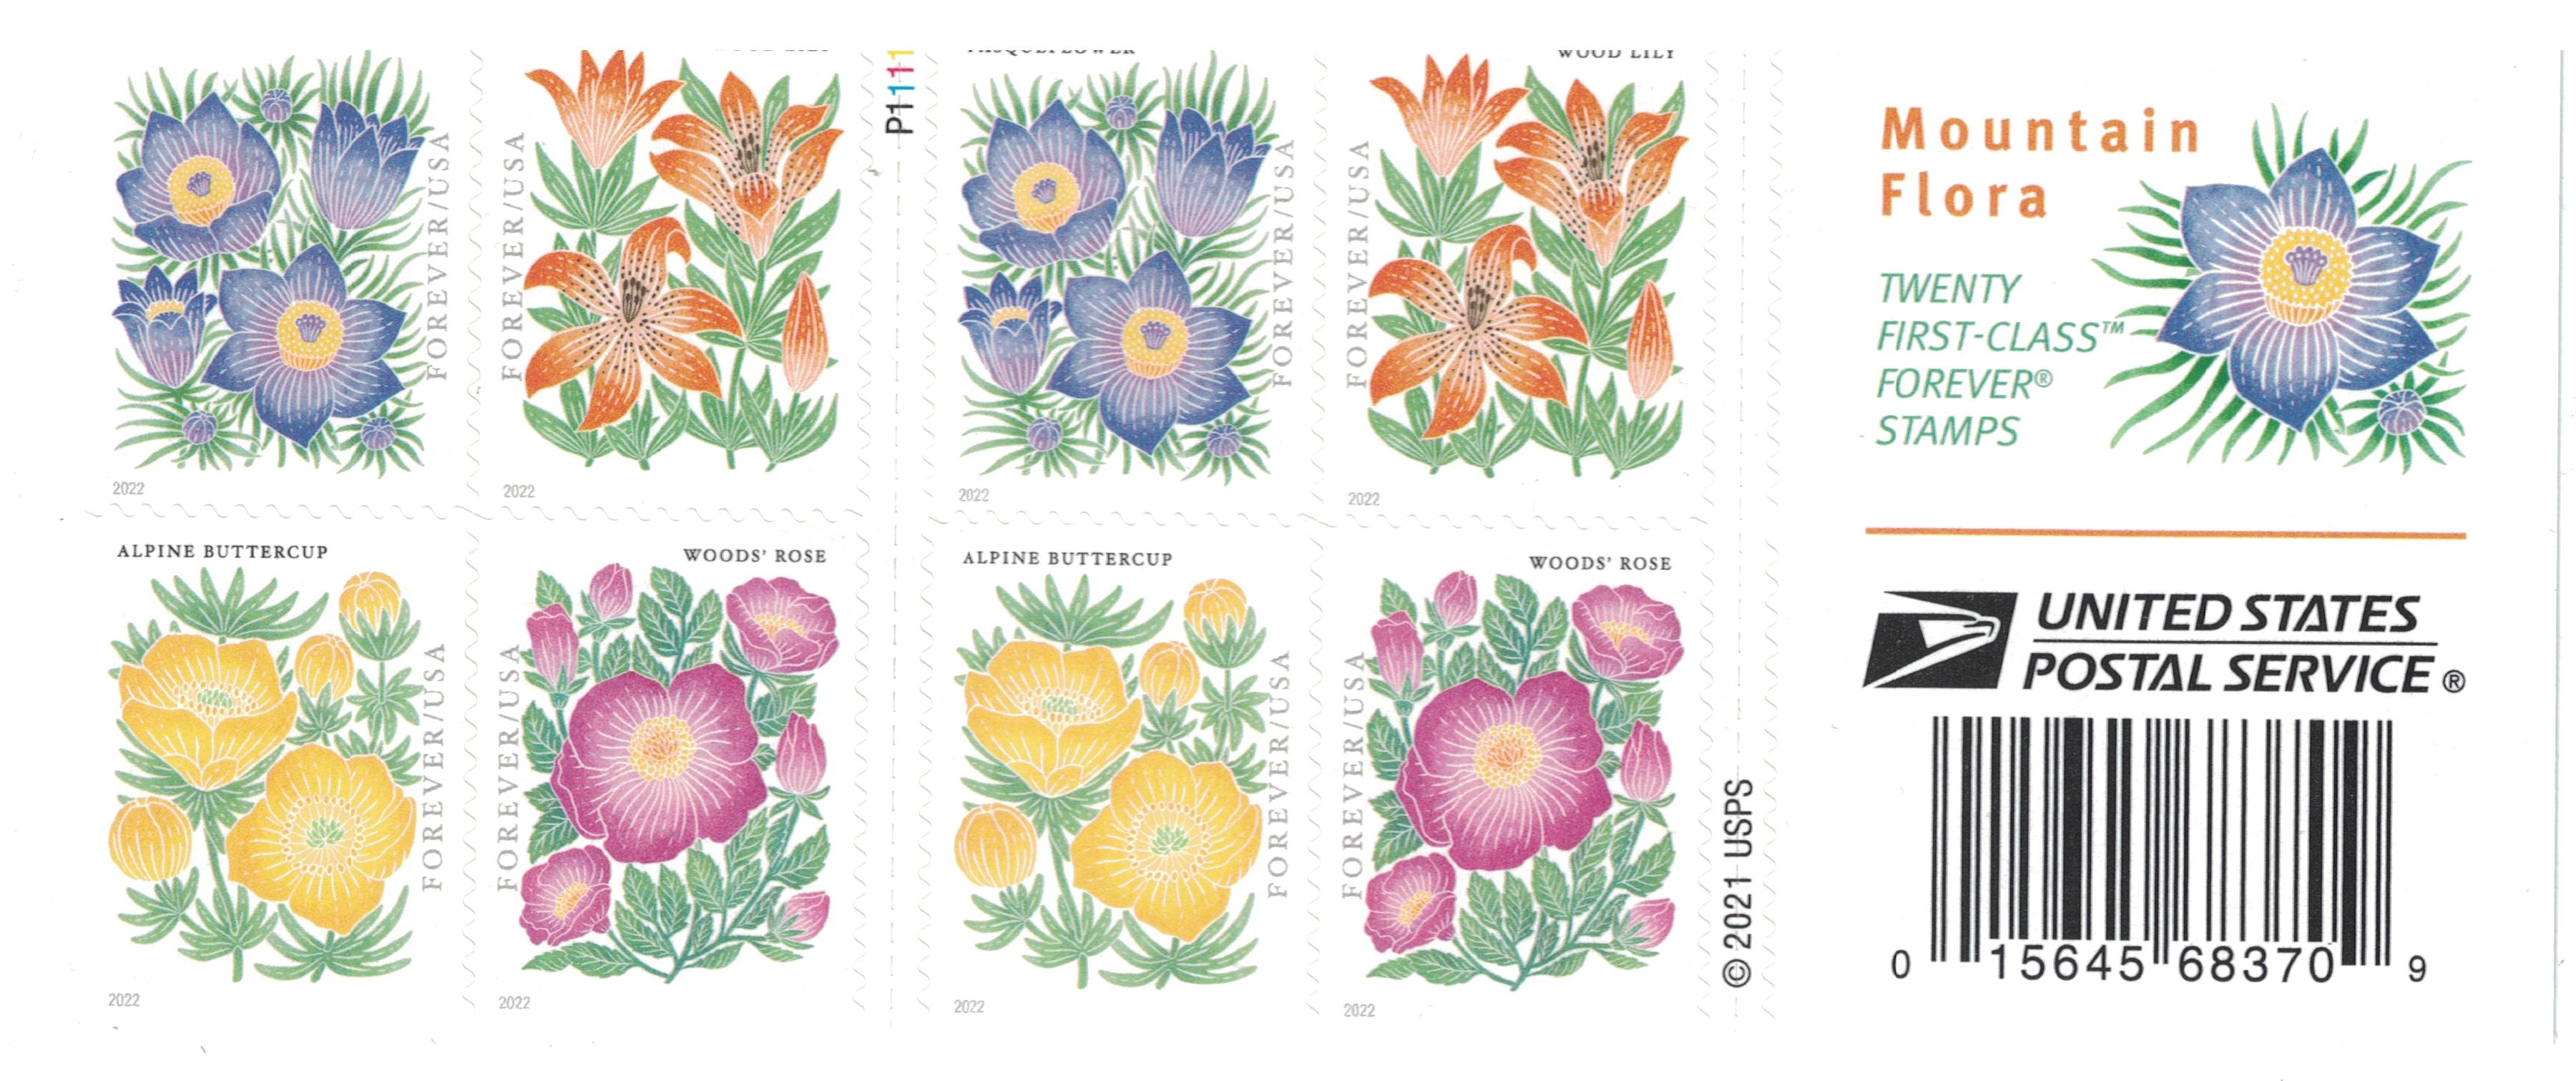 USPS Stamps - Mountain Flora - Book of 20